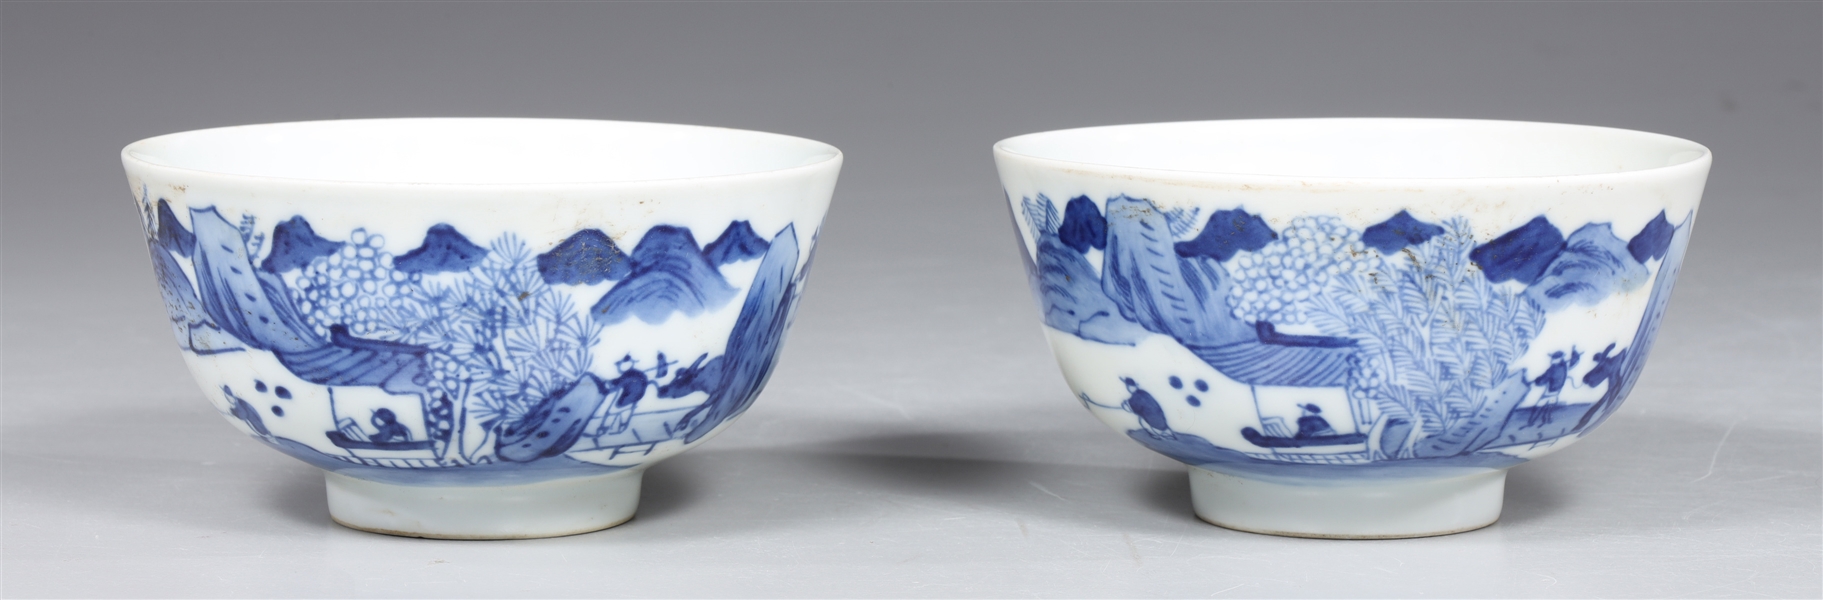 Pair of Chinese Blue & White Porcelain Bowls